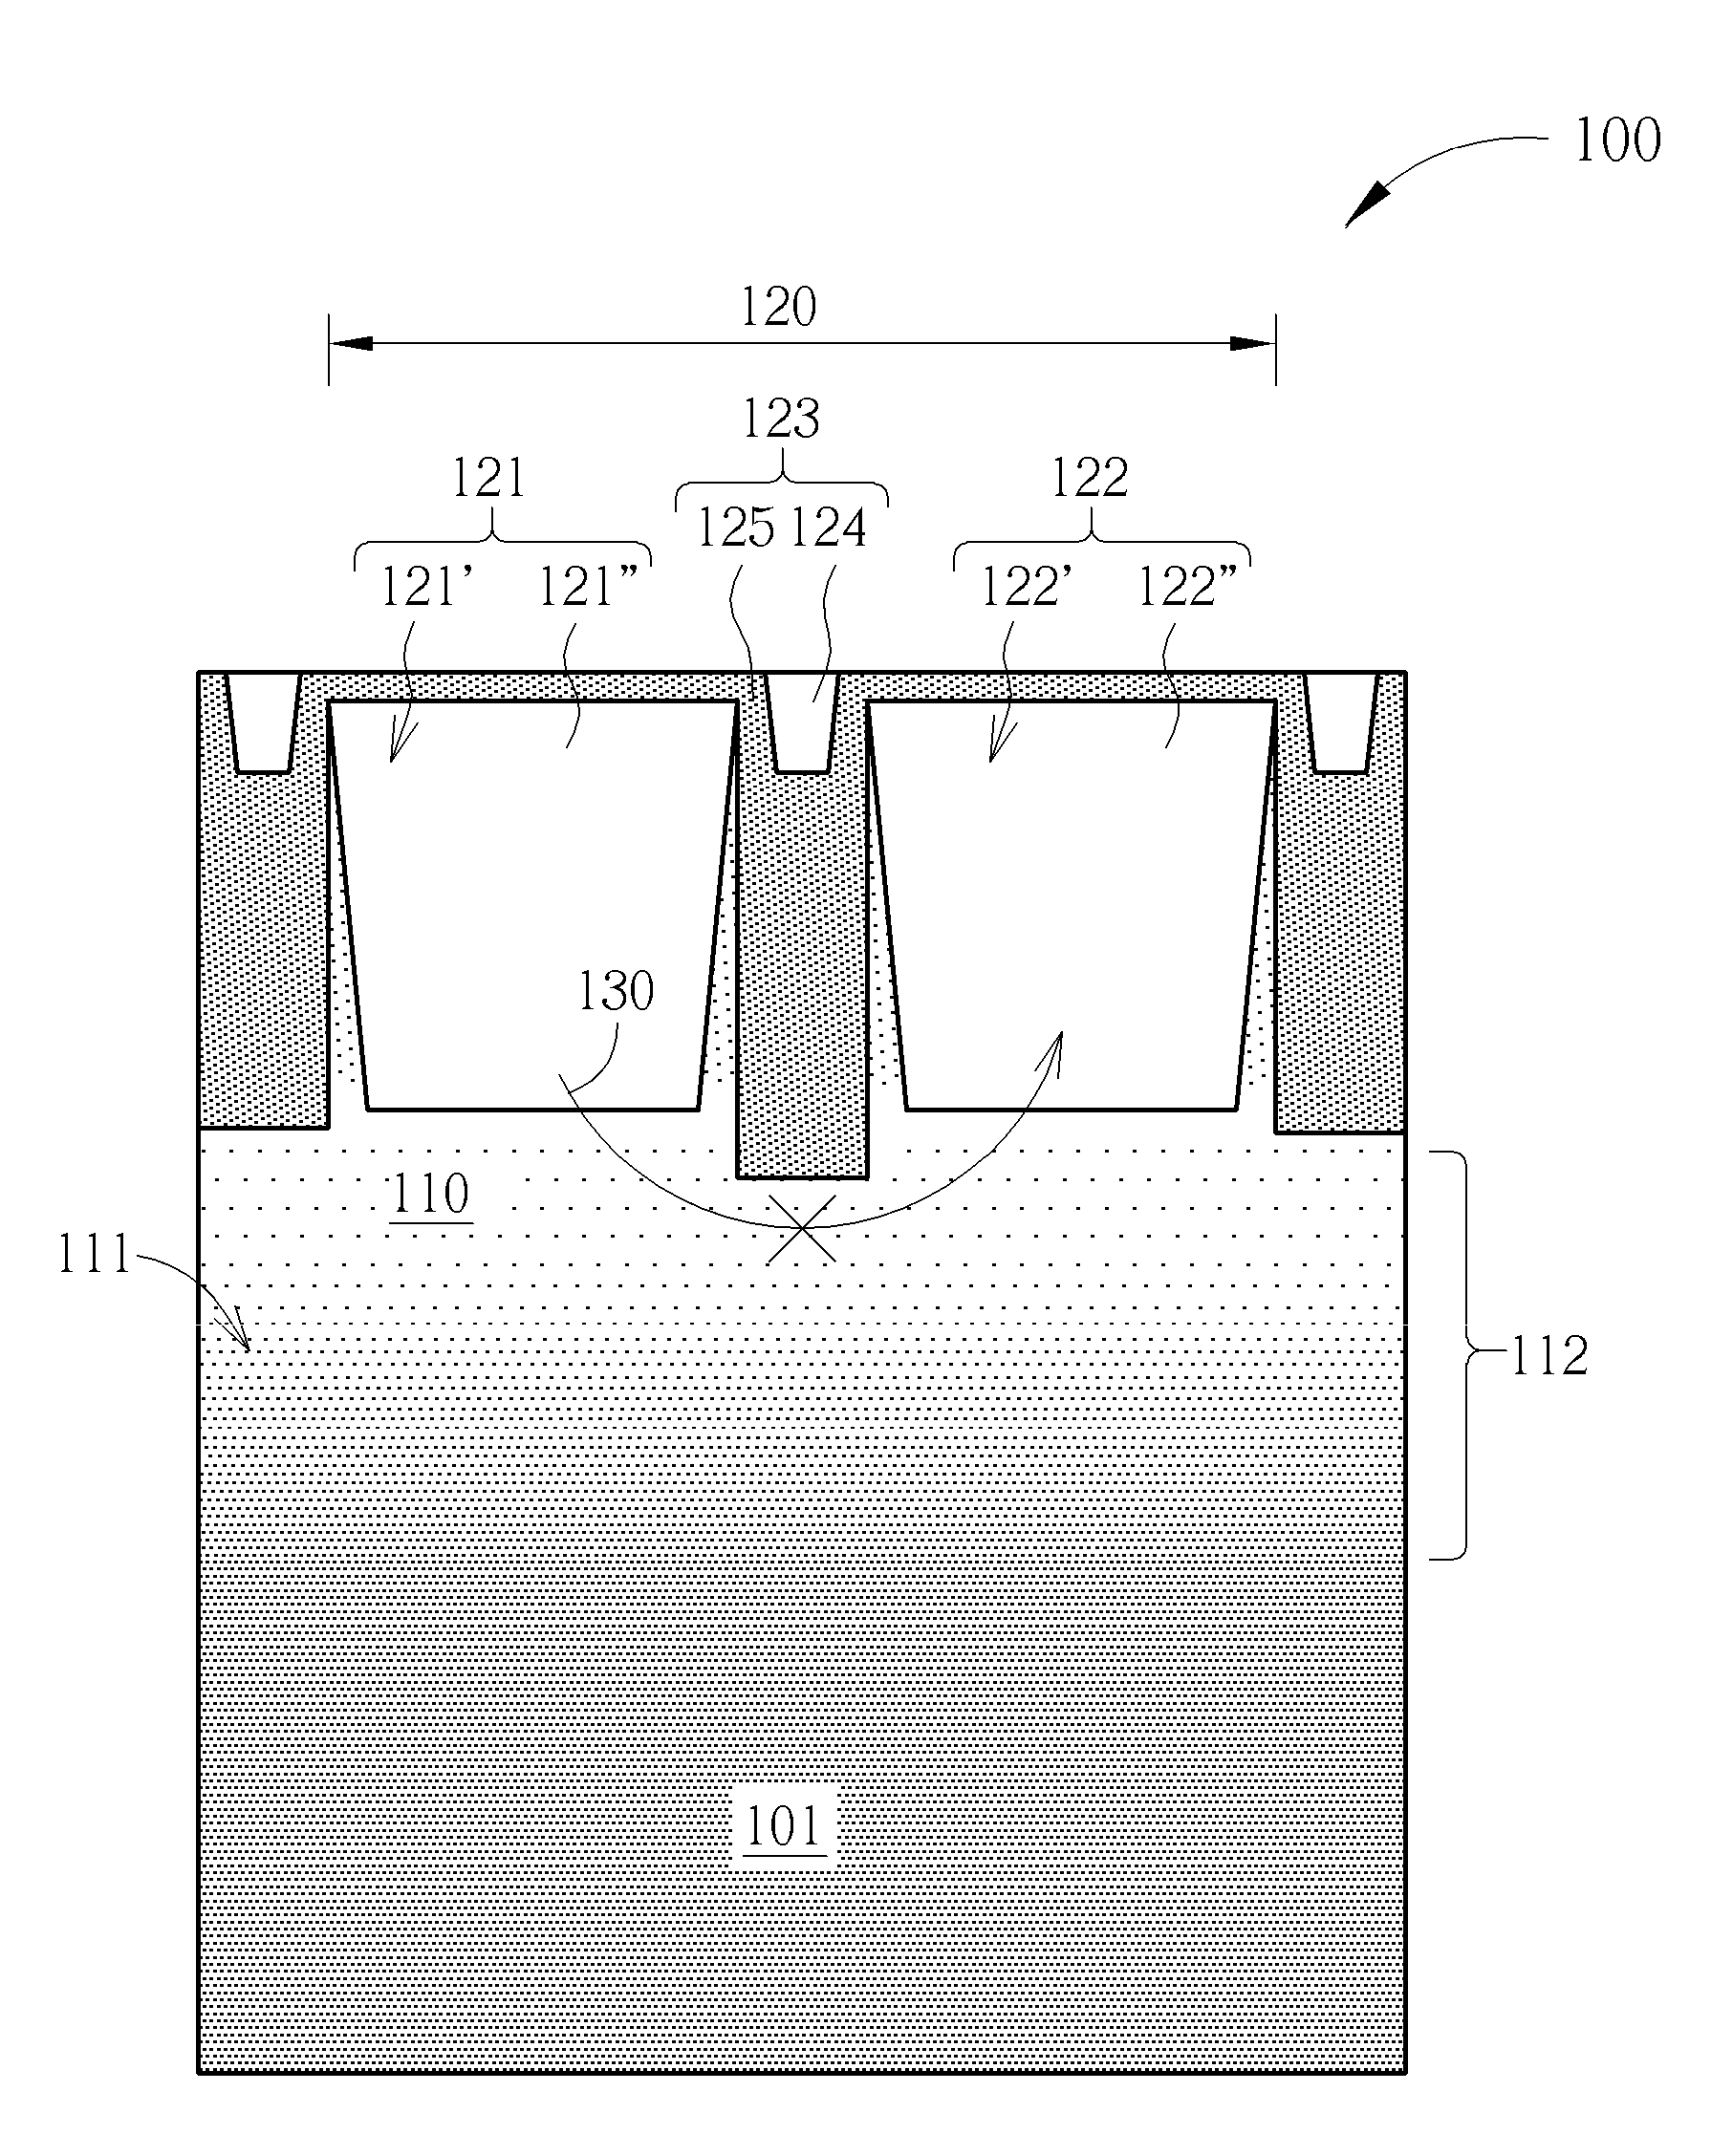 Semiconductor structure, method for forming the same and method for suppressing hot cluster